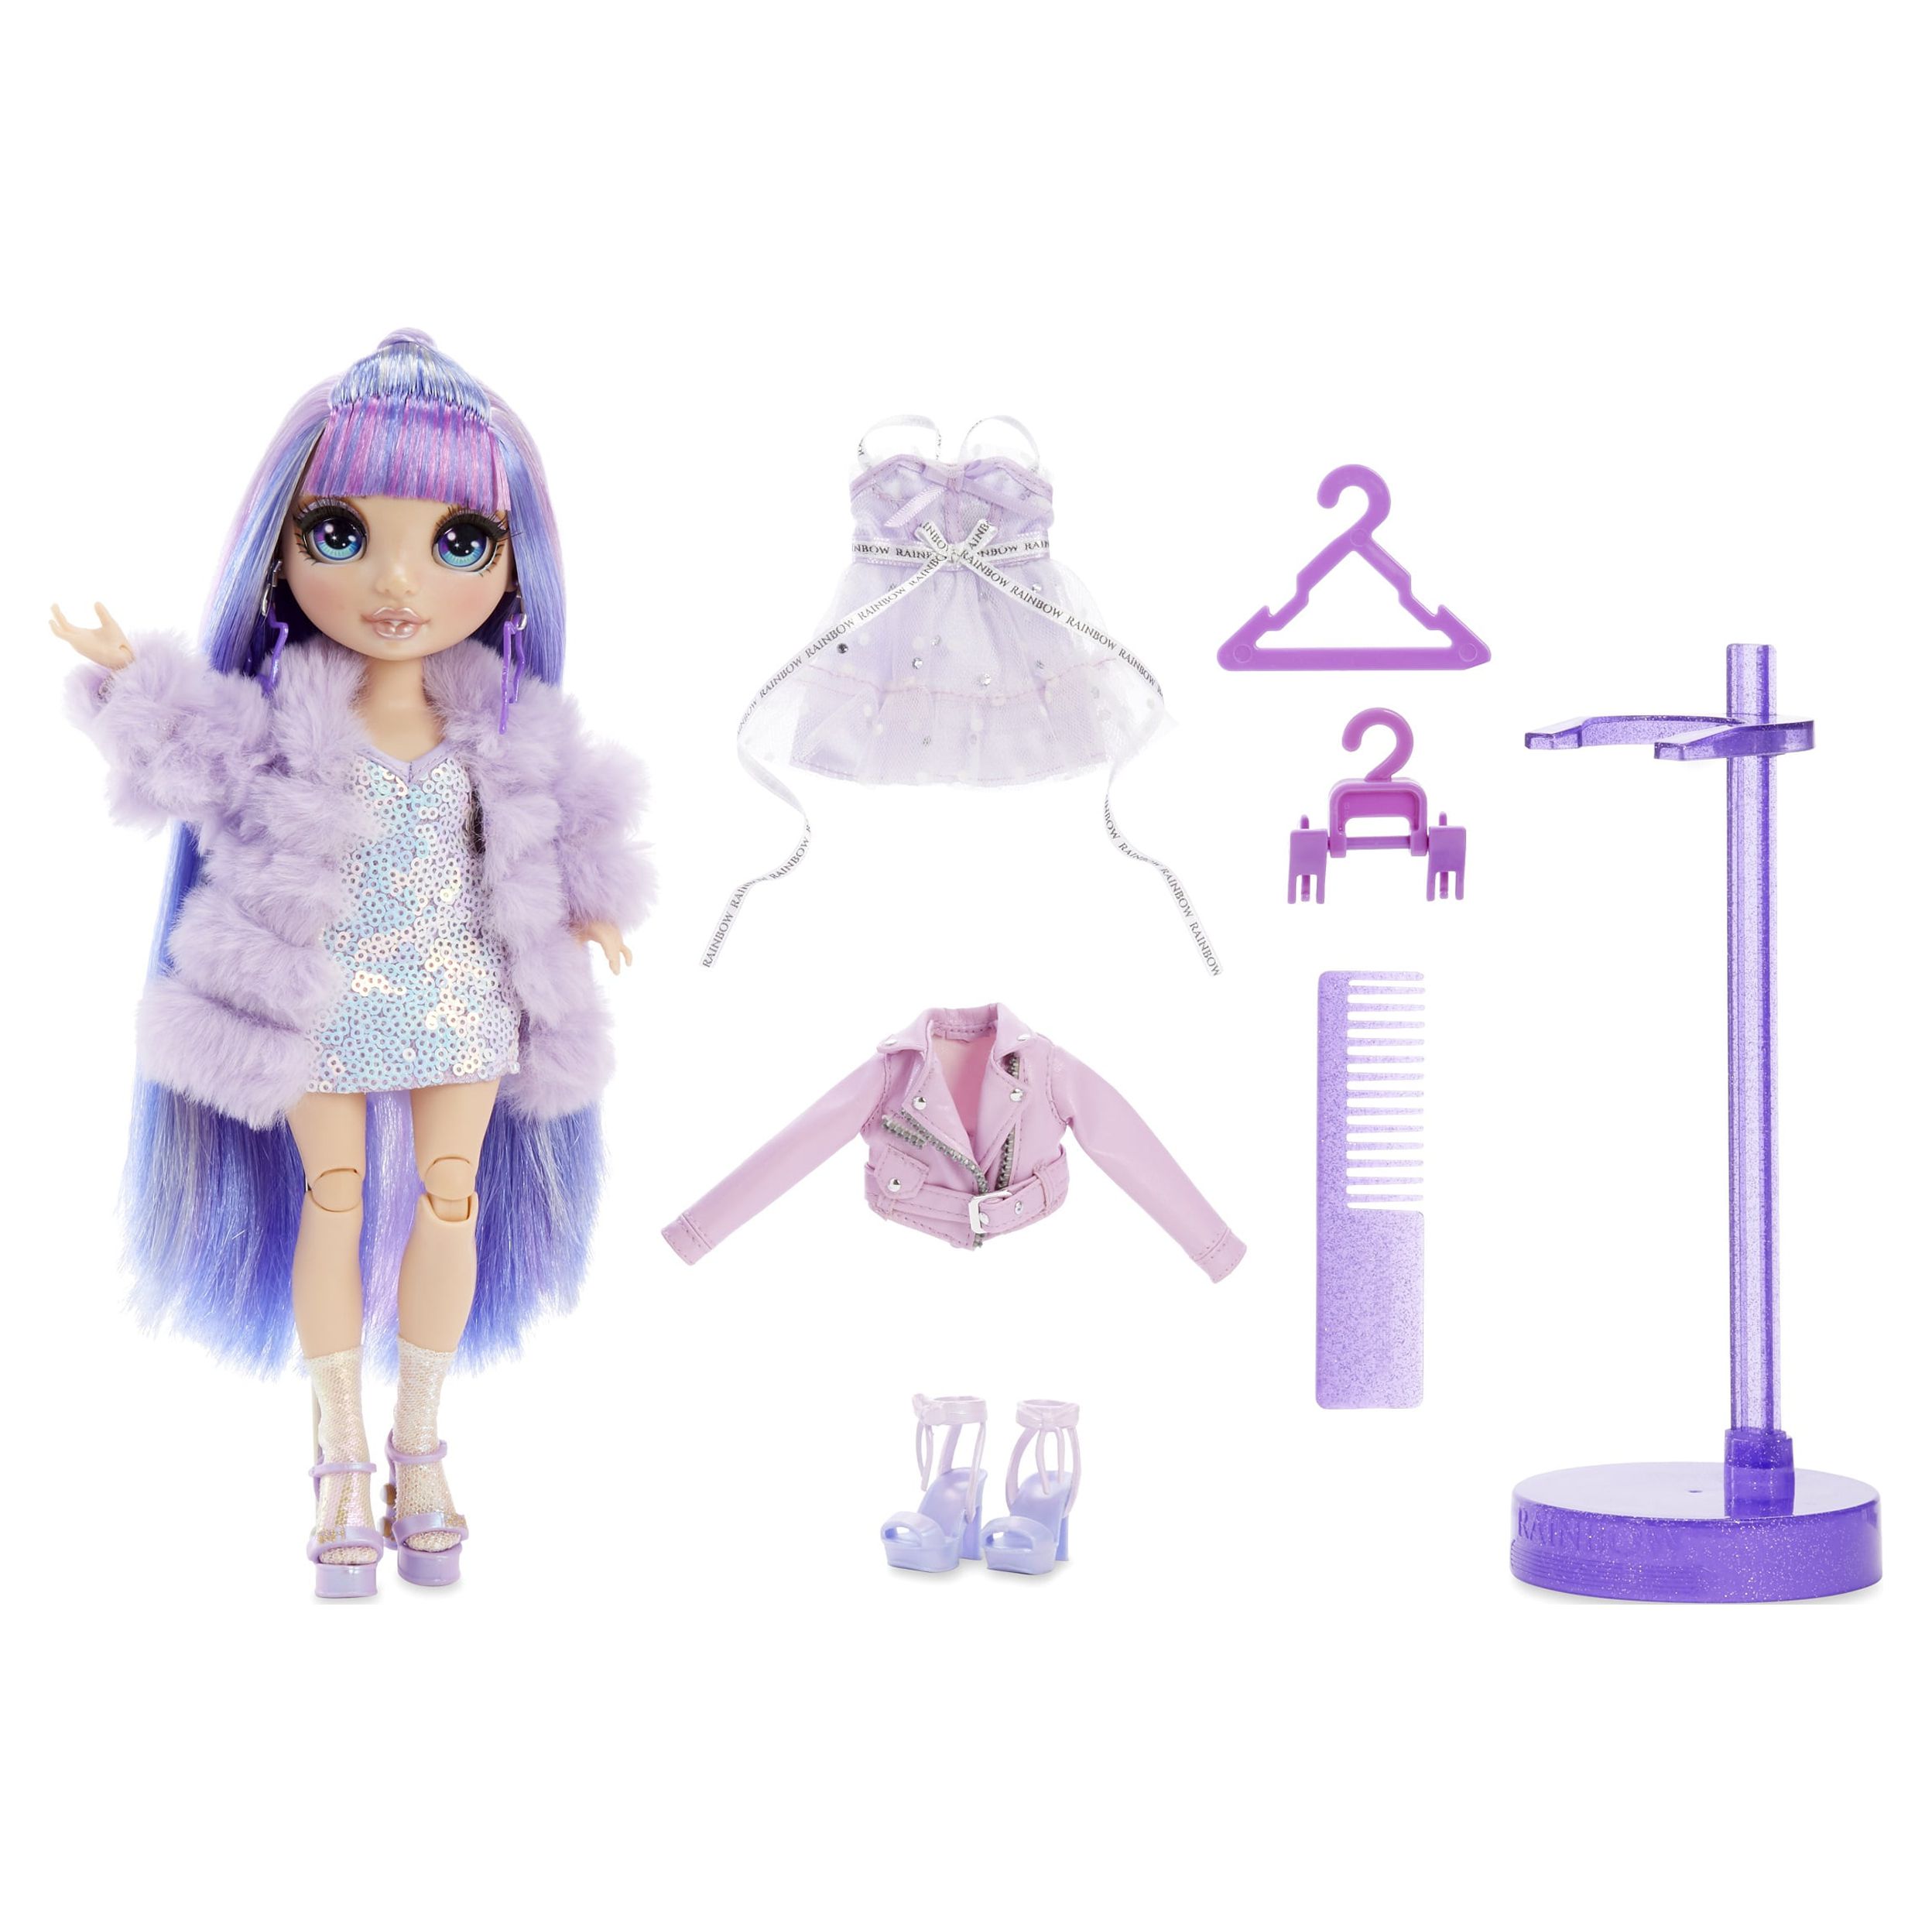 Rainbow High Violet Willow – Purple Fashion Doll with 2 Outfits - image 1 of 8